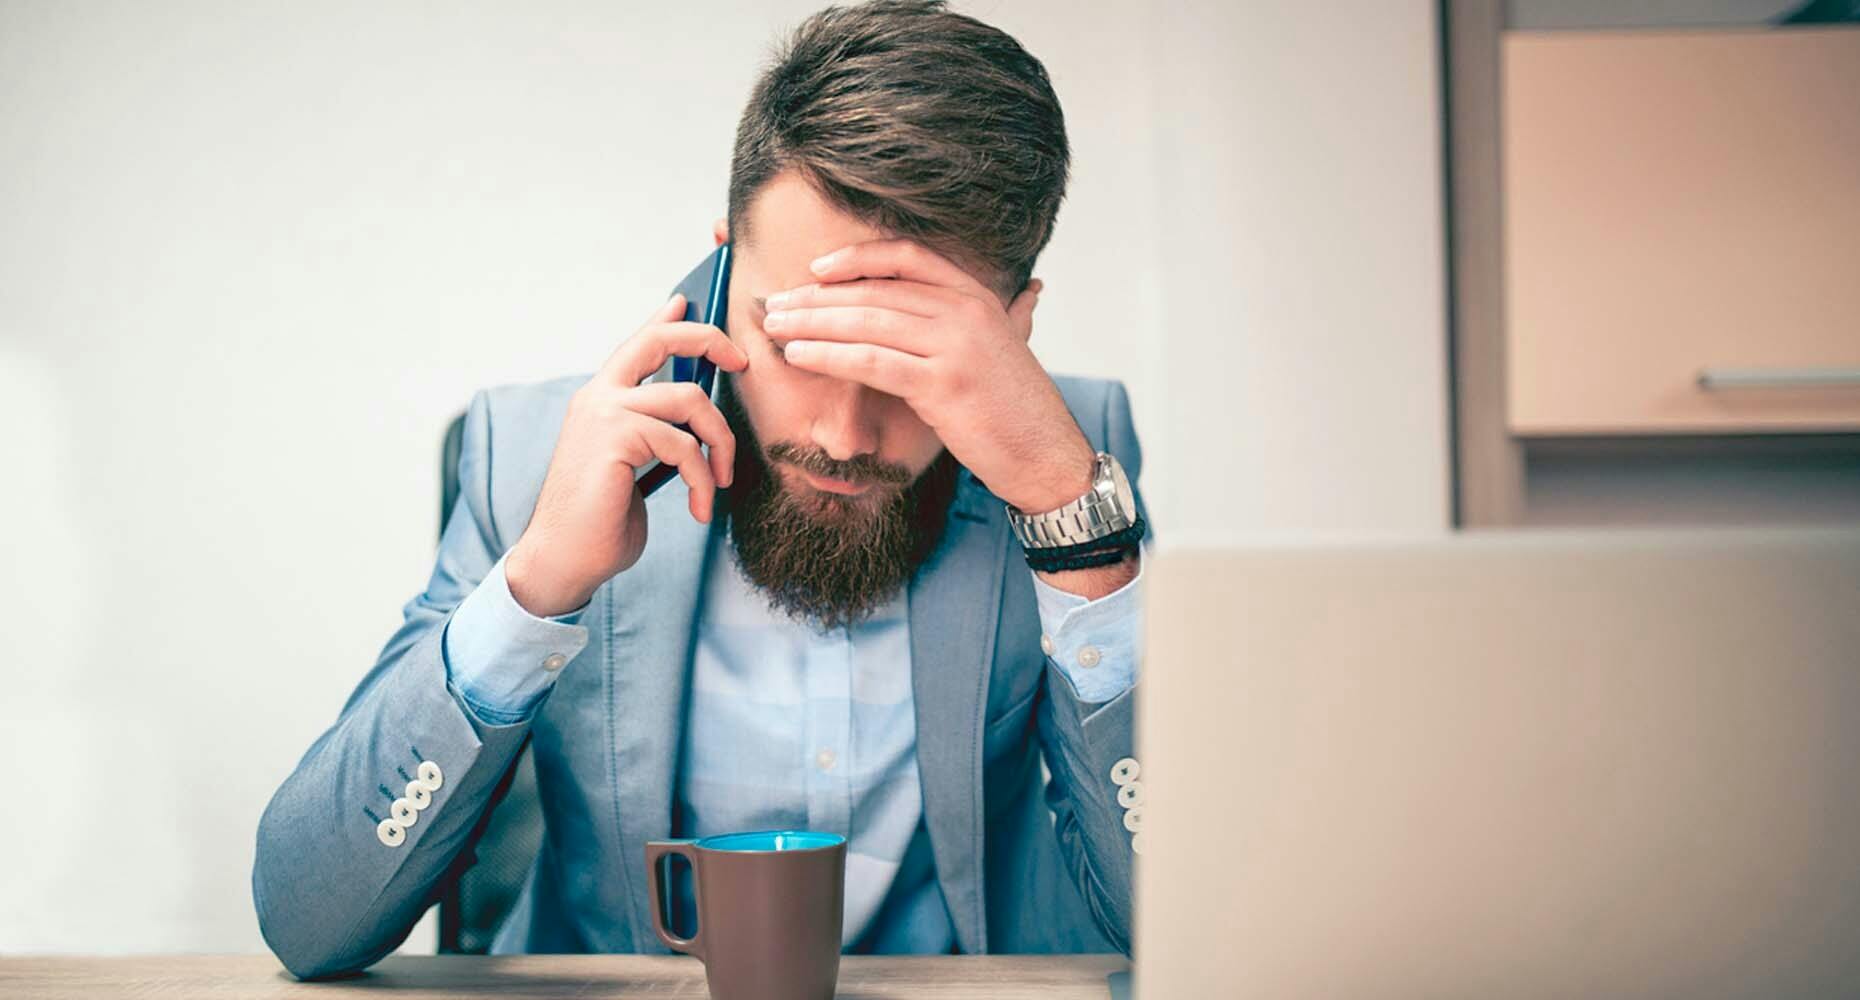 An illustration of a salesperson on the phone, looking shy or hesitant, reflecting the challenges and nuances of communication and negotiation in sales interactions.